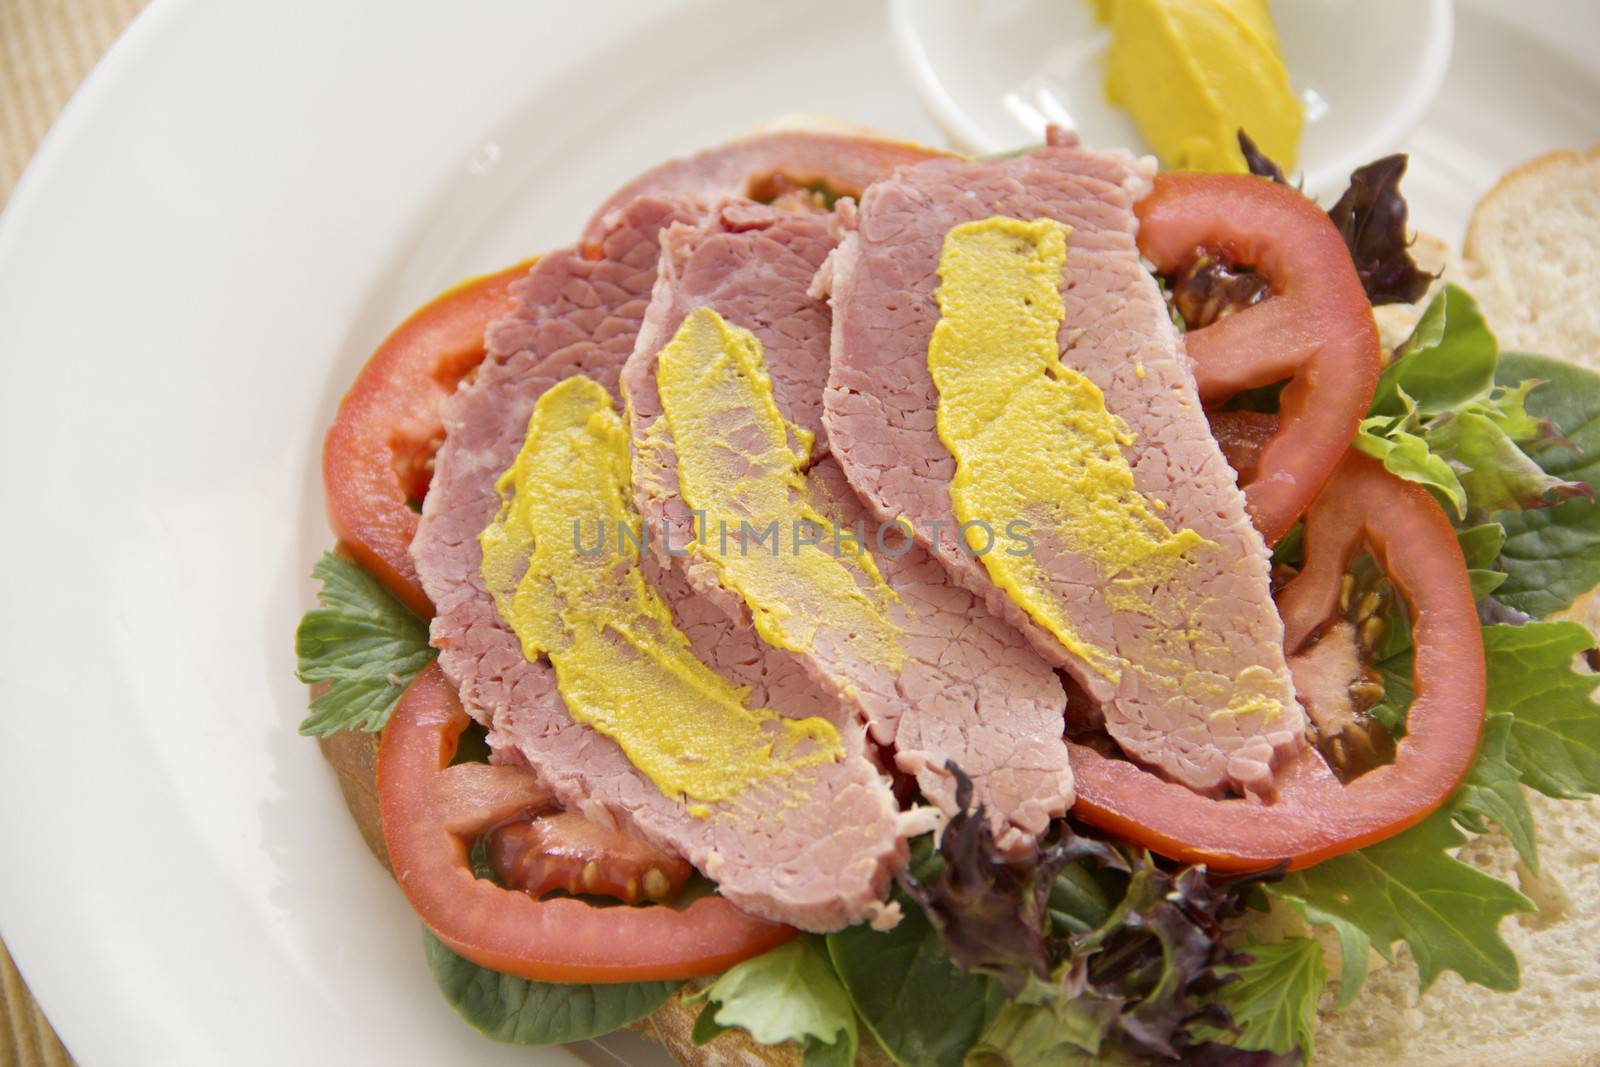 Delicious open corn beef open sandwich with mustard and fresh garden salad.